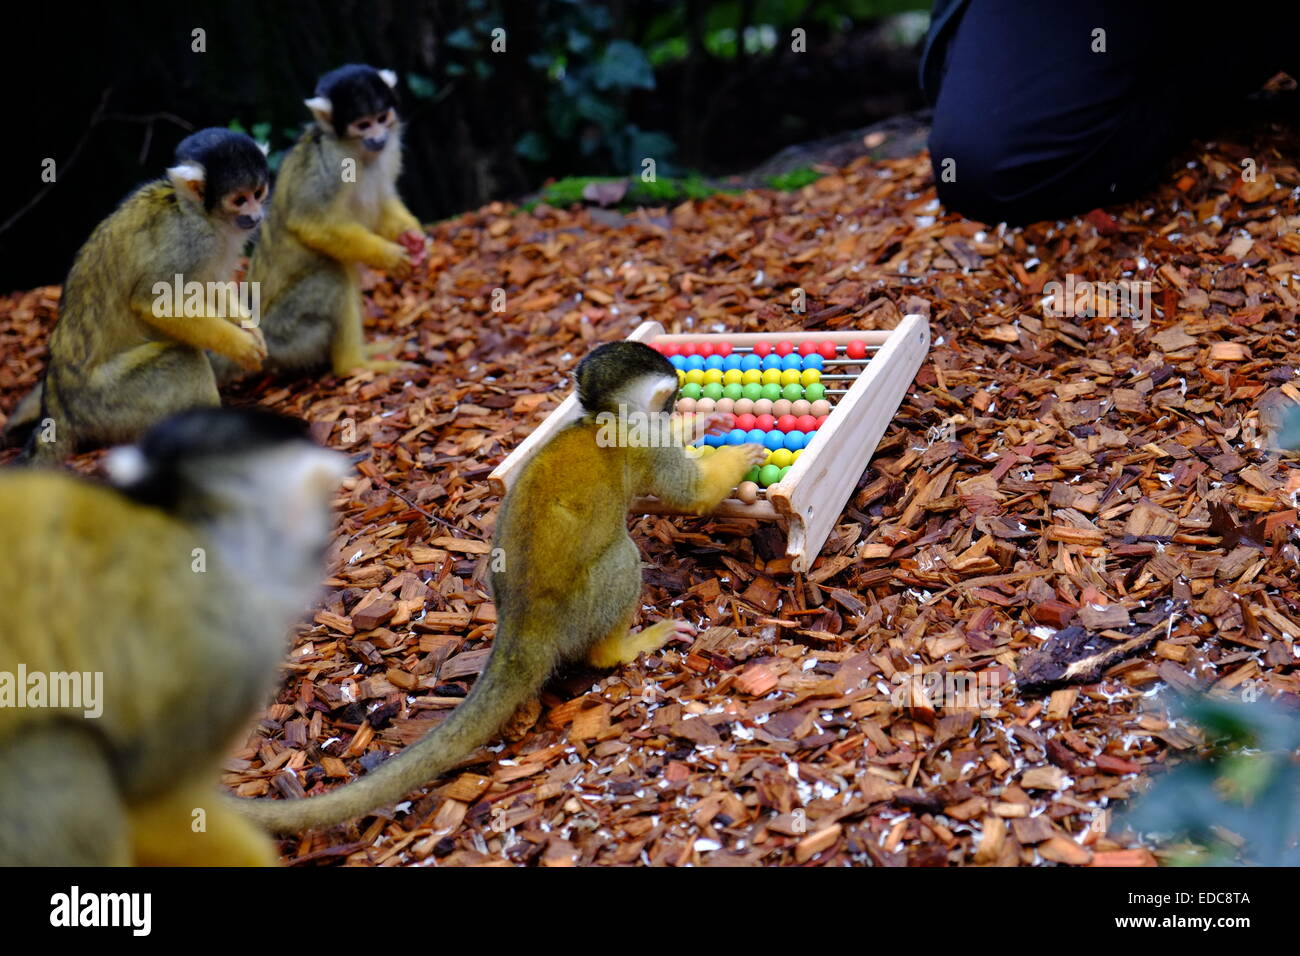 london-zoo-uk-05th-jan-2015-squirrel-monkeys-help-with-the-counting-EDC8TA.jpg